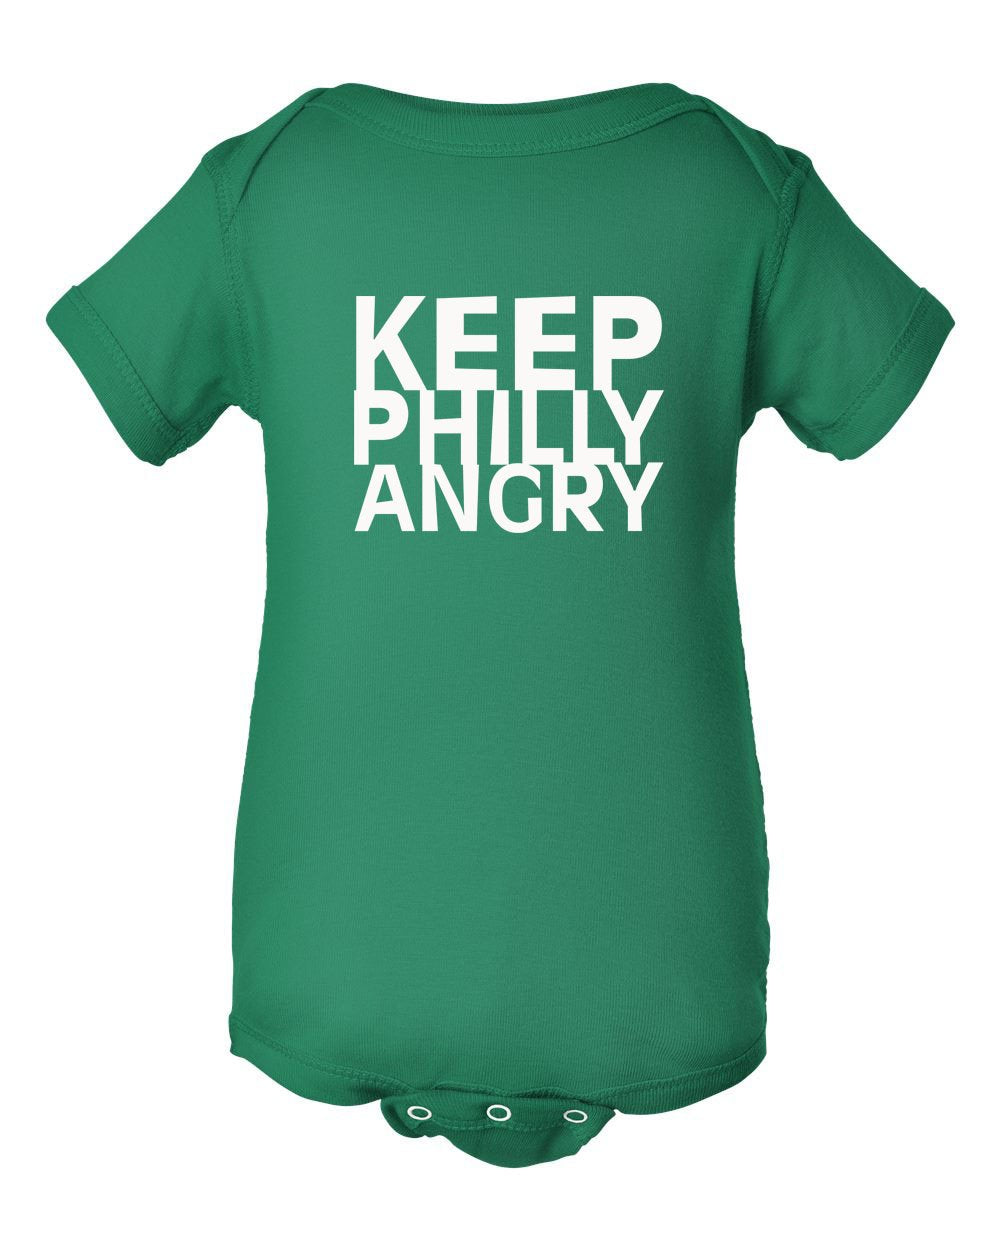 Keep Philly Angry White Ink INFANT Onesie